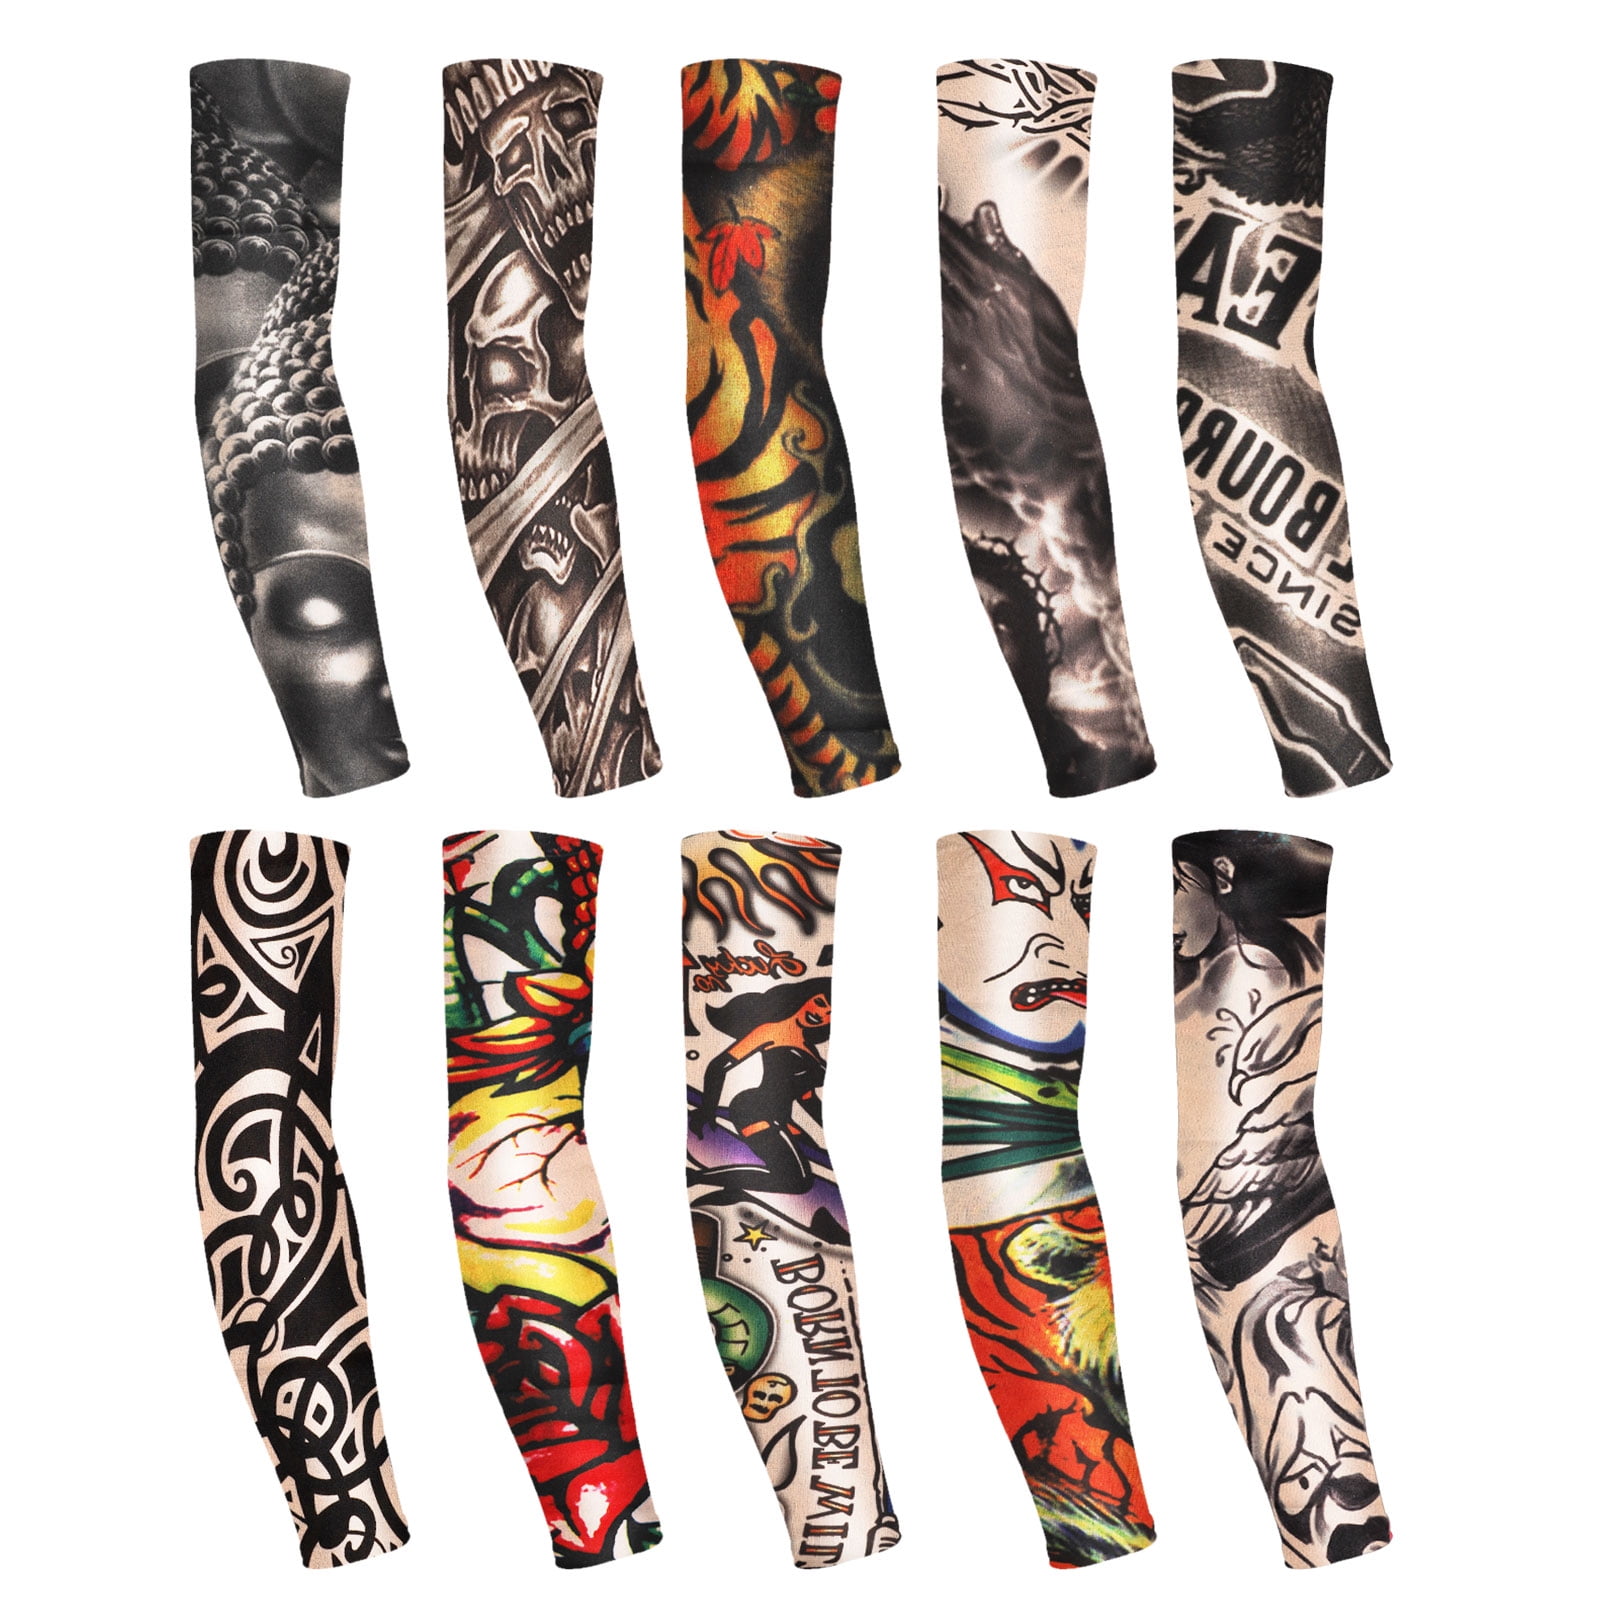 5pcs Breathable 3d Tattoo Cooling Arm Sleeves Cover Sport UV Sun Protection US for sale online 